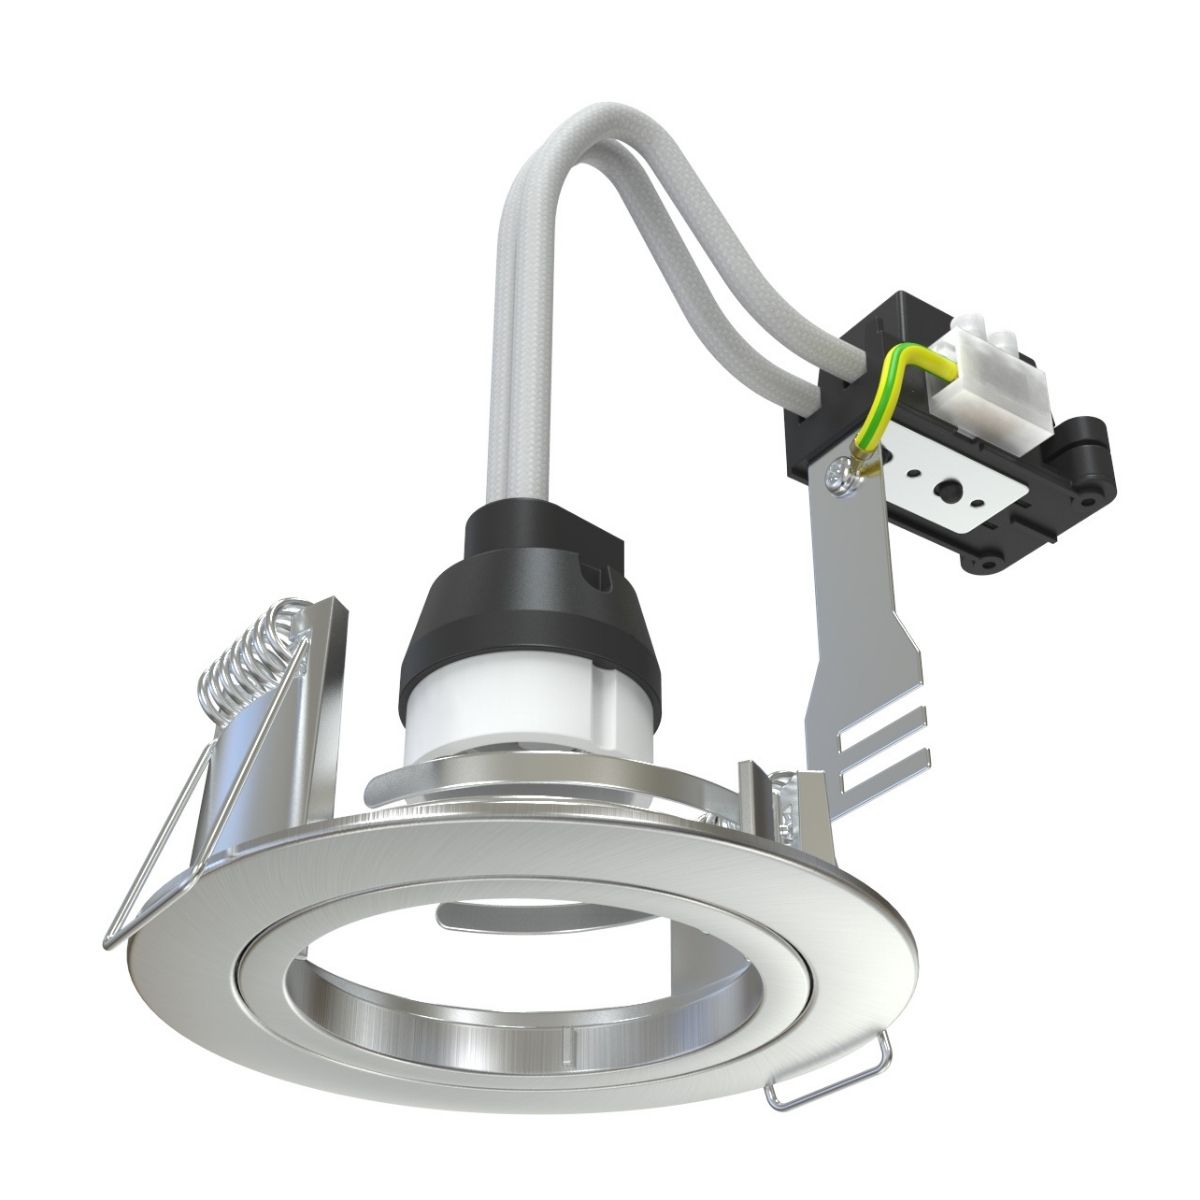 View GU10 Downlight Fixed Die Cast In A Brushed Chrome Finish information